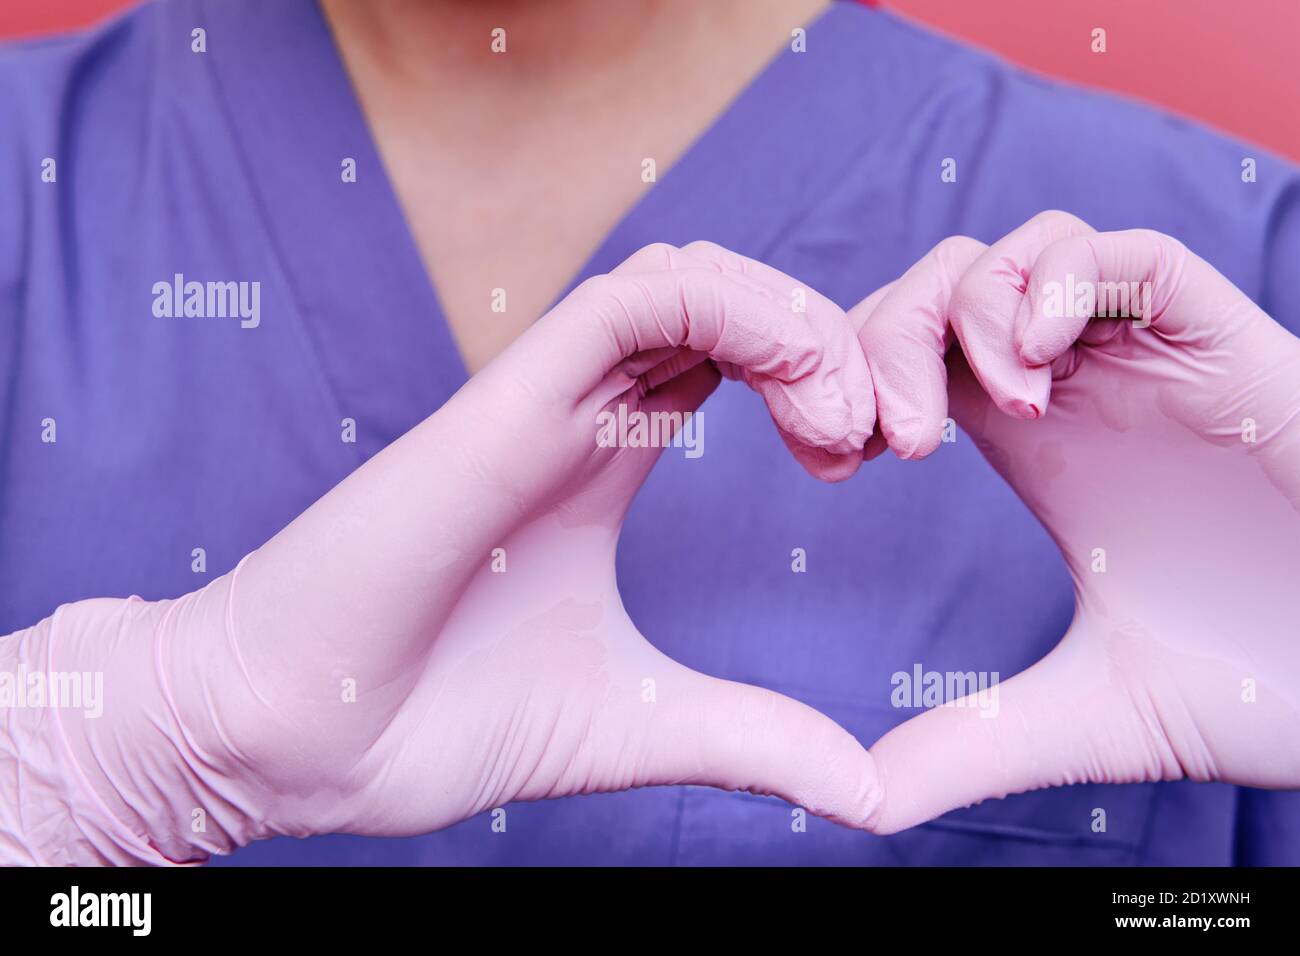 The medic shows the heart sign with his fingers, close-up. Doctor's hands in medical gloves with the sign of love for patients, concept. Stay home. Stock Photo